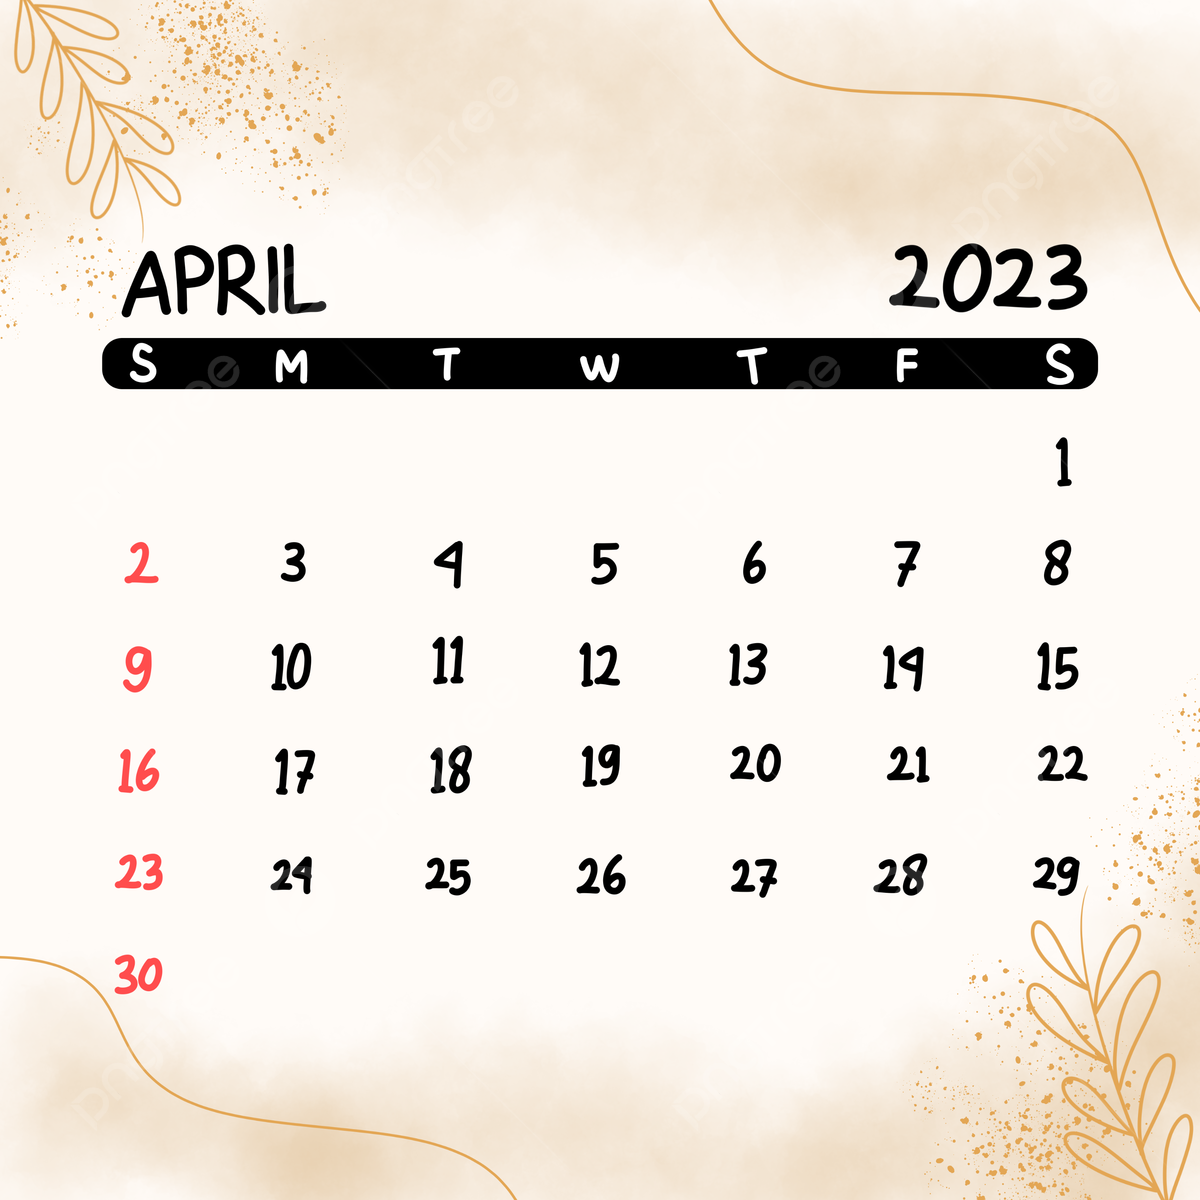 Watercolor Calendar Of April 2023 Background, Calendar, April Background Image And Wallpaper for Free Download